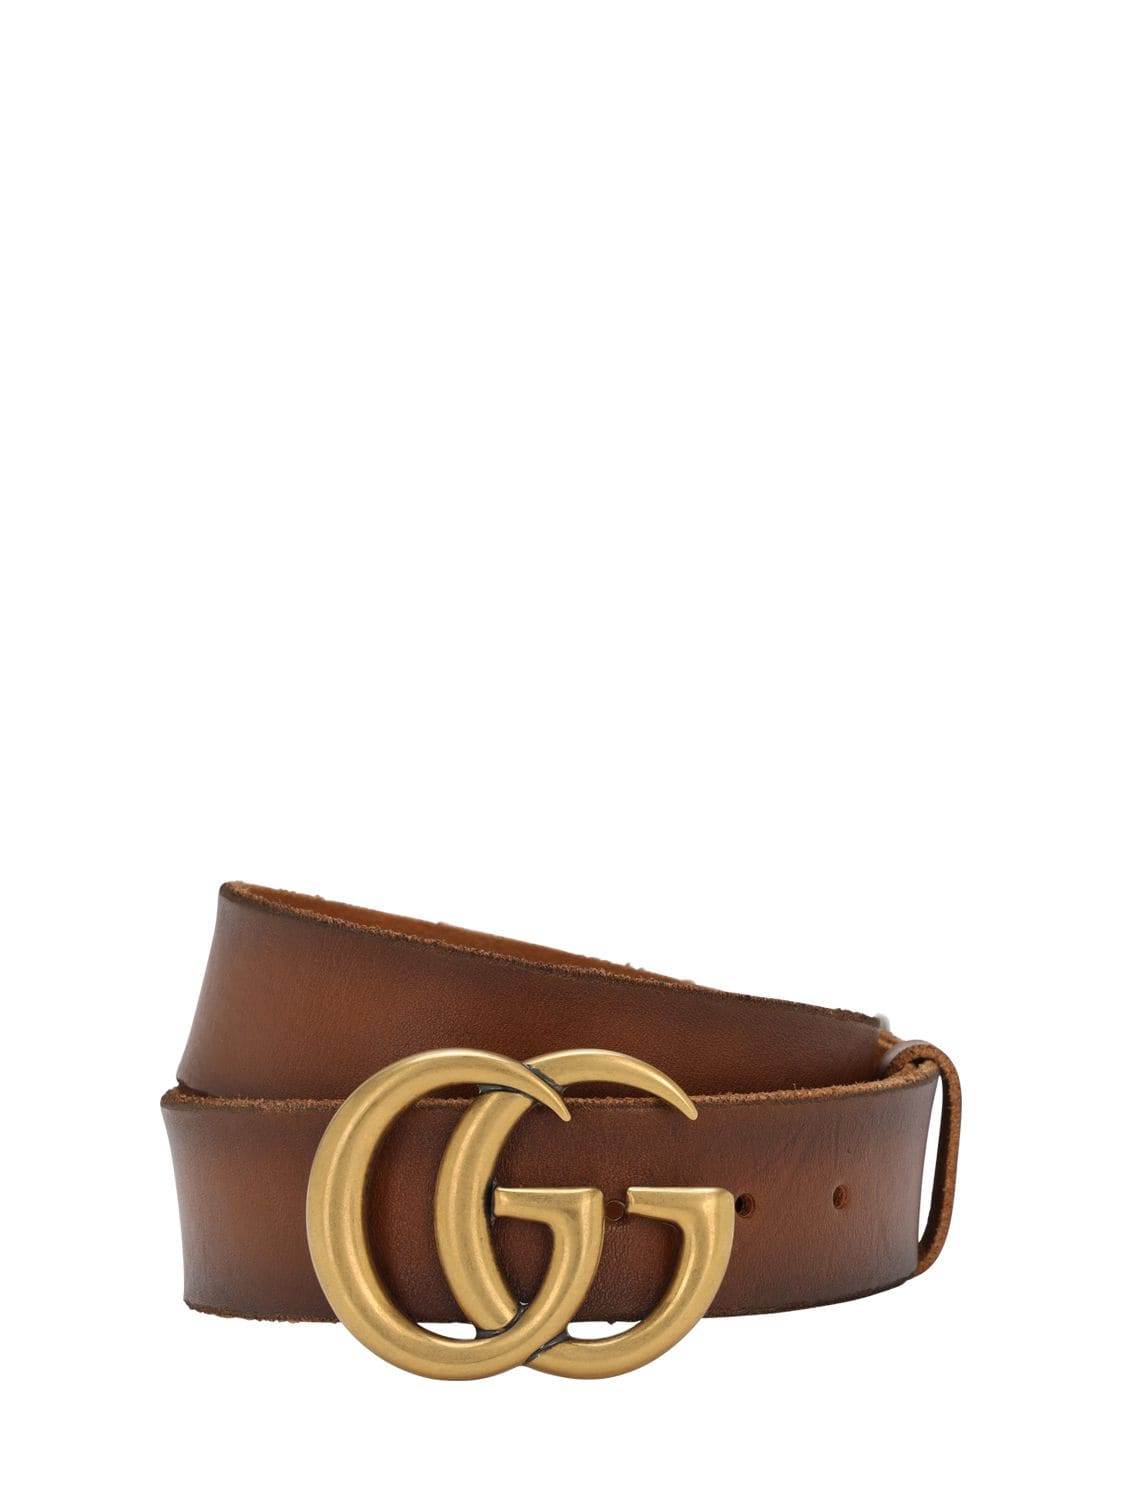 4cm Gg Gold Buckle Leather Belt